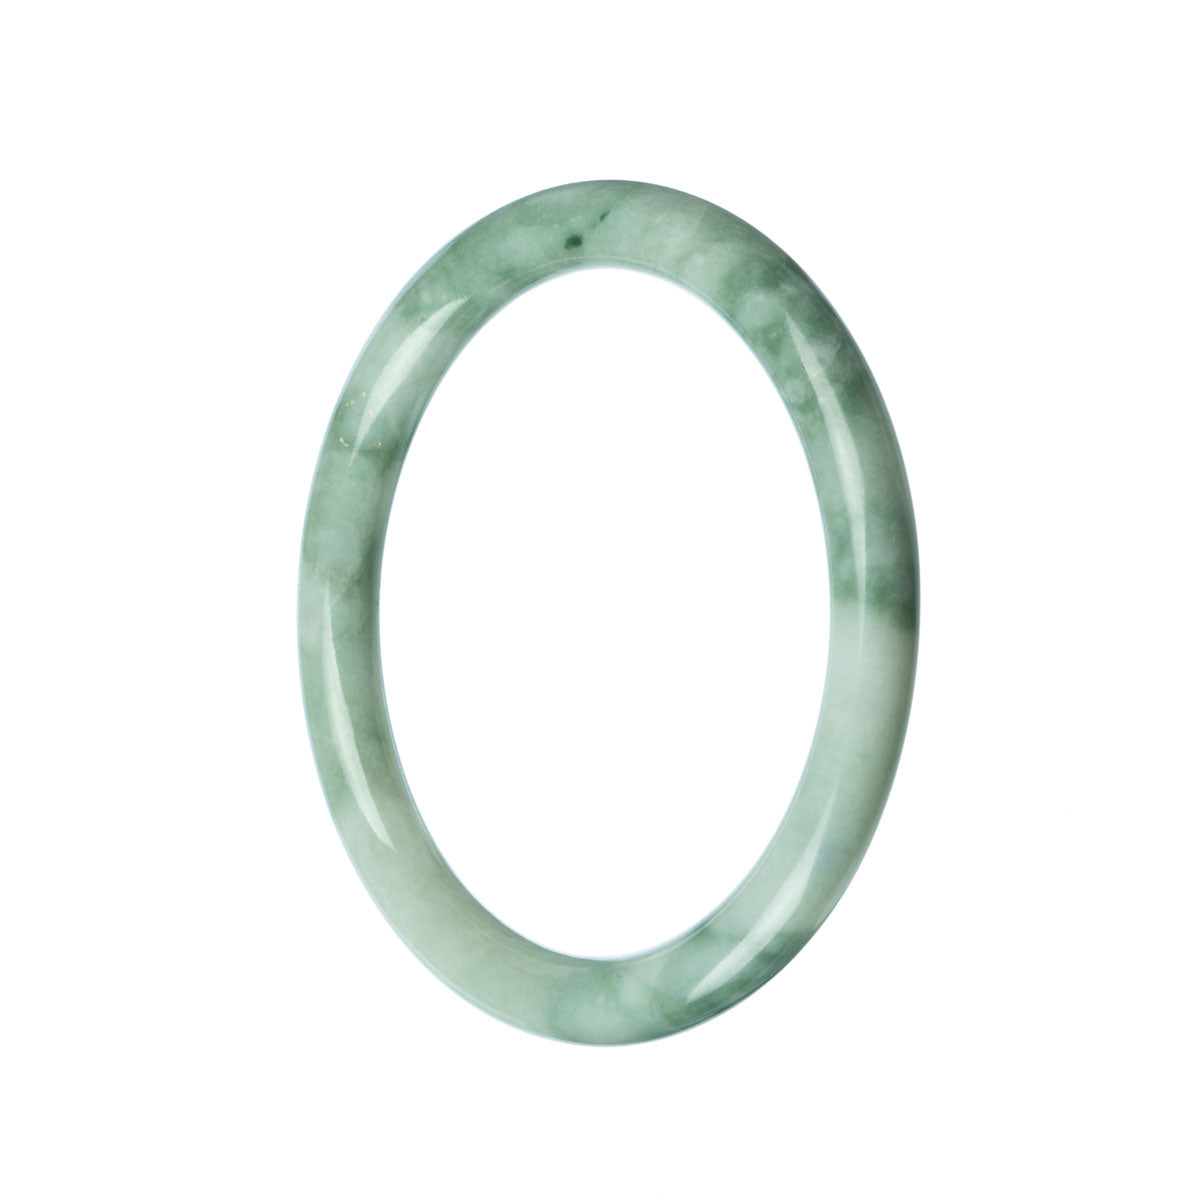 A close-up image of a sleek and vibrant green Burmese jade bangle bracelet with a petite round shape, showcasing its natural beauty and elegance.